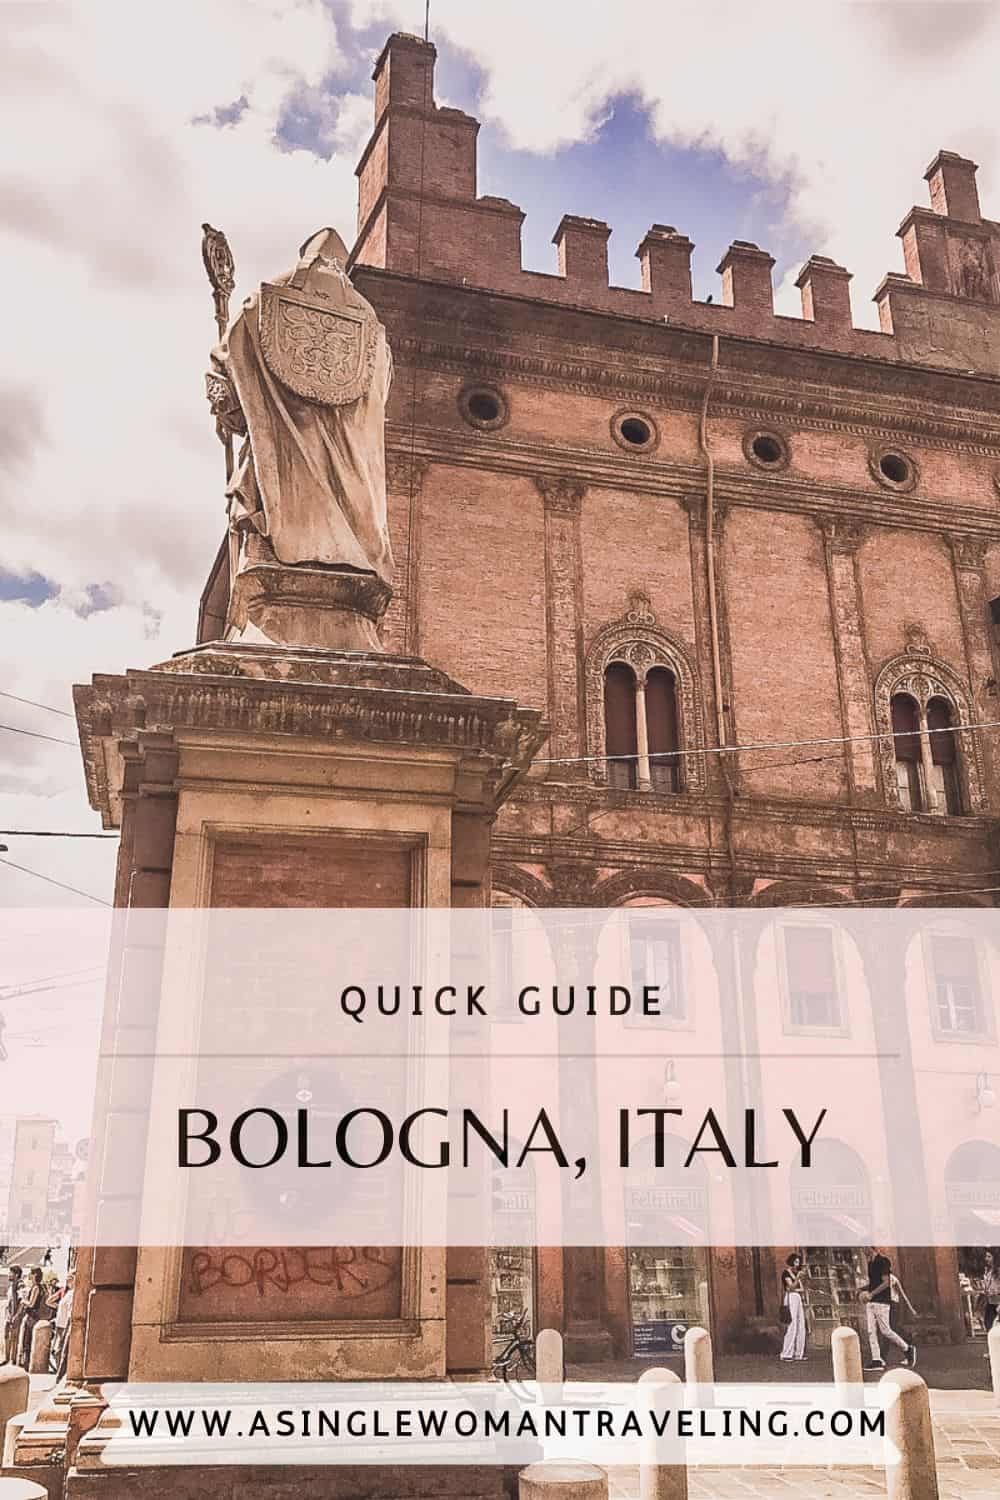 Quick Guide to Bologna Italy